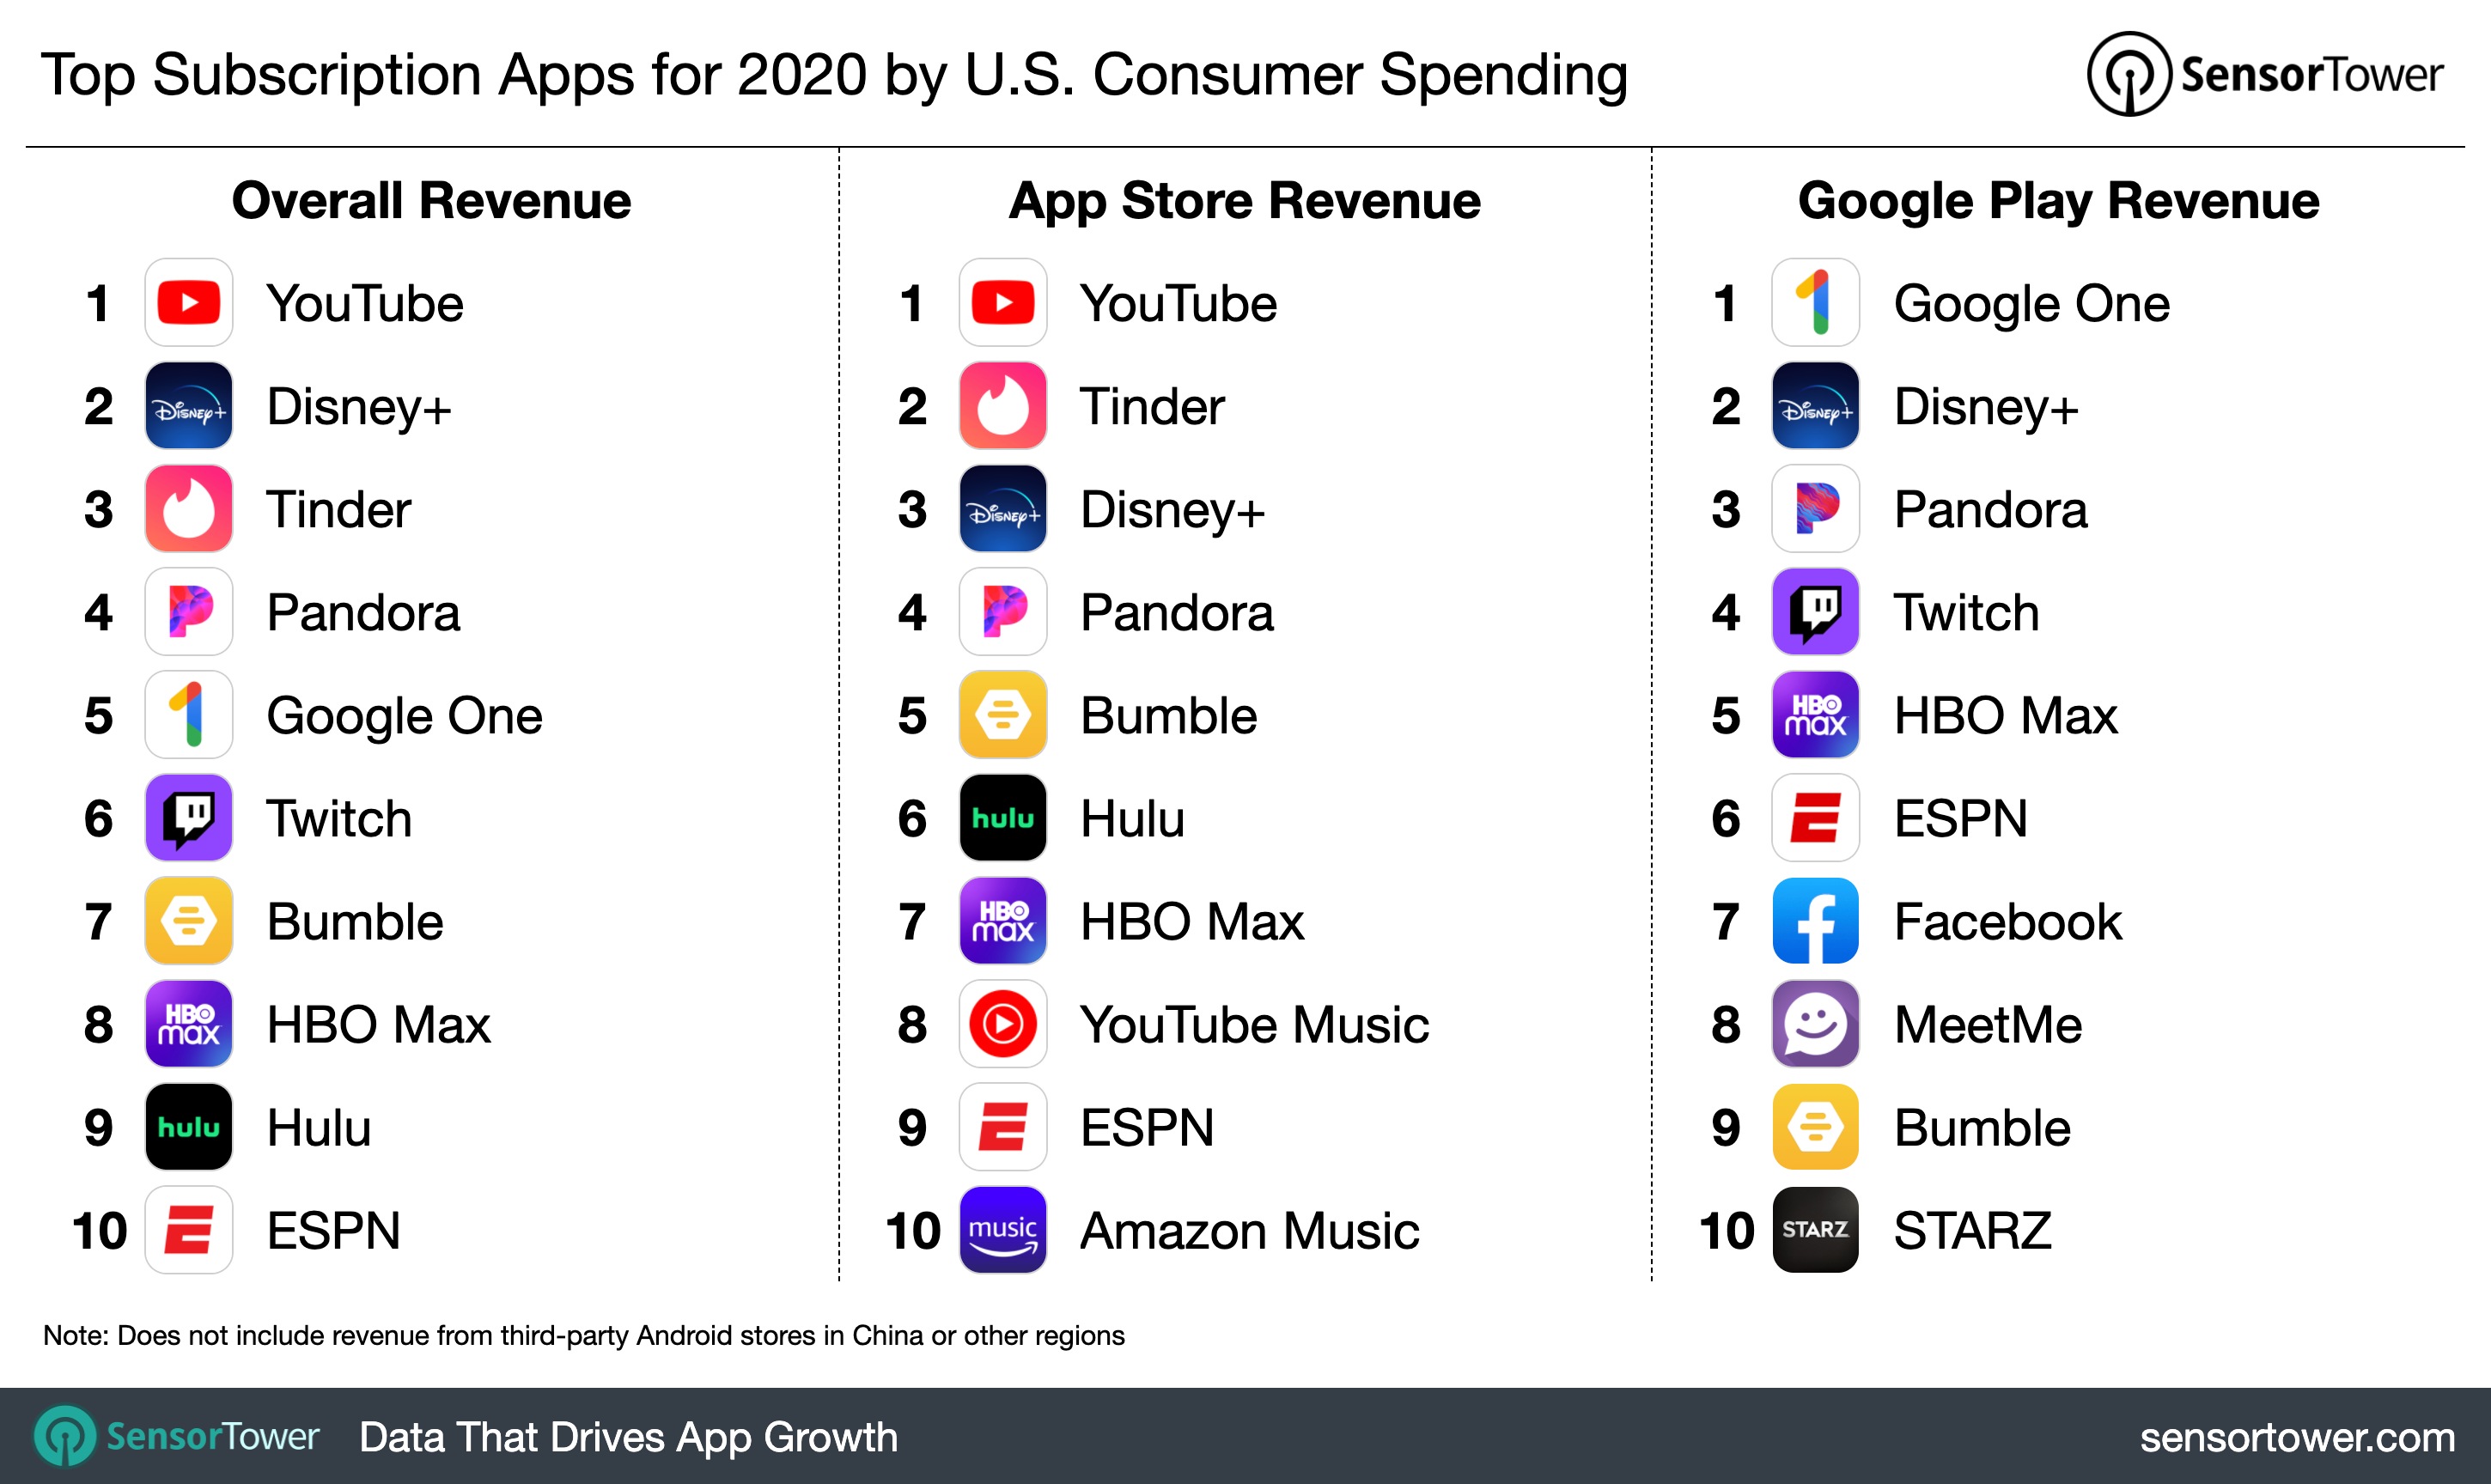 Global consumer spending in top 100 subscription apps rose 34% in 2020